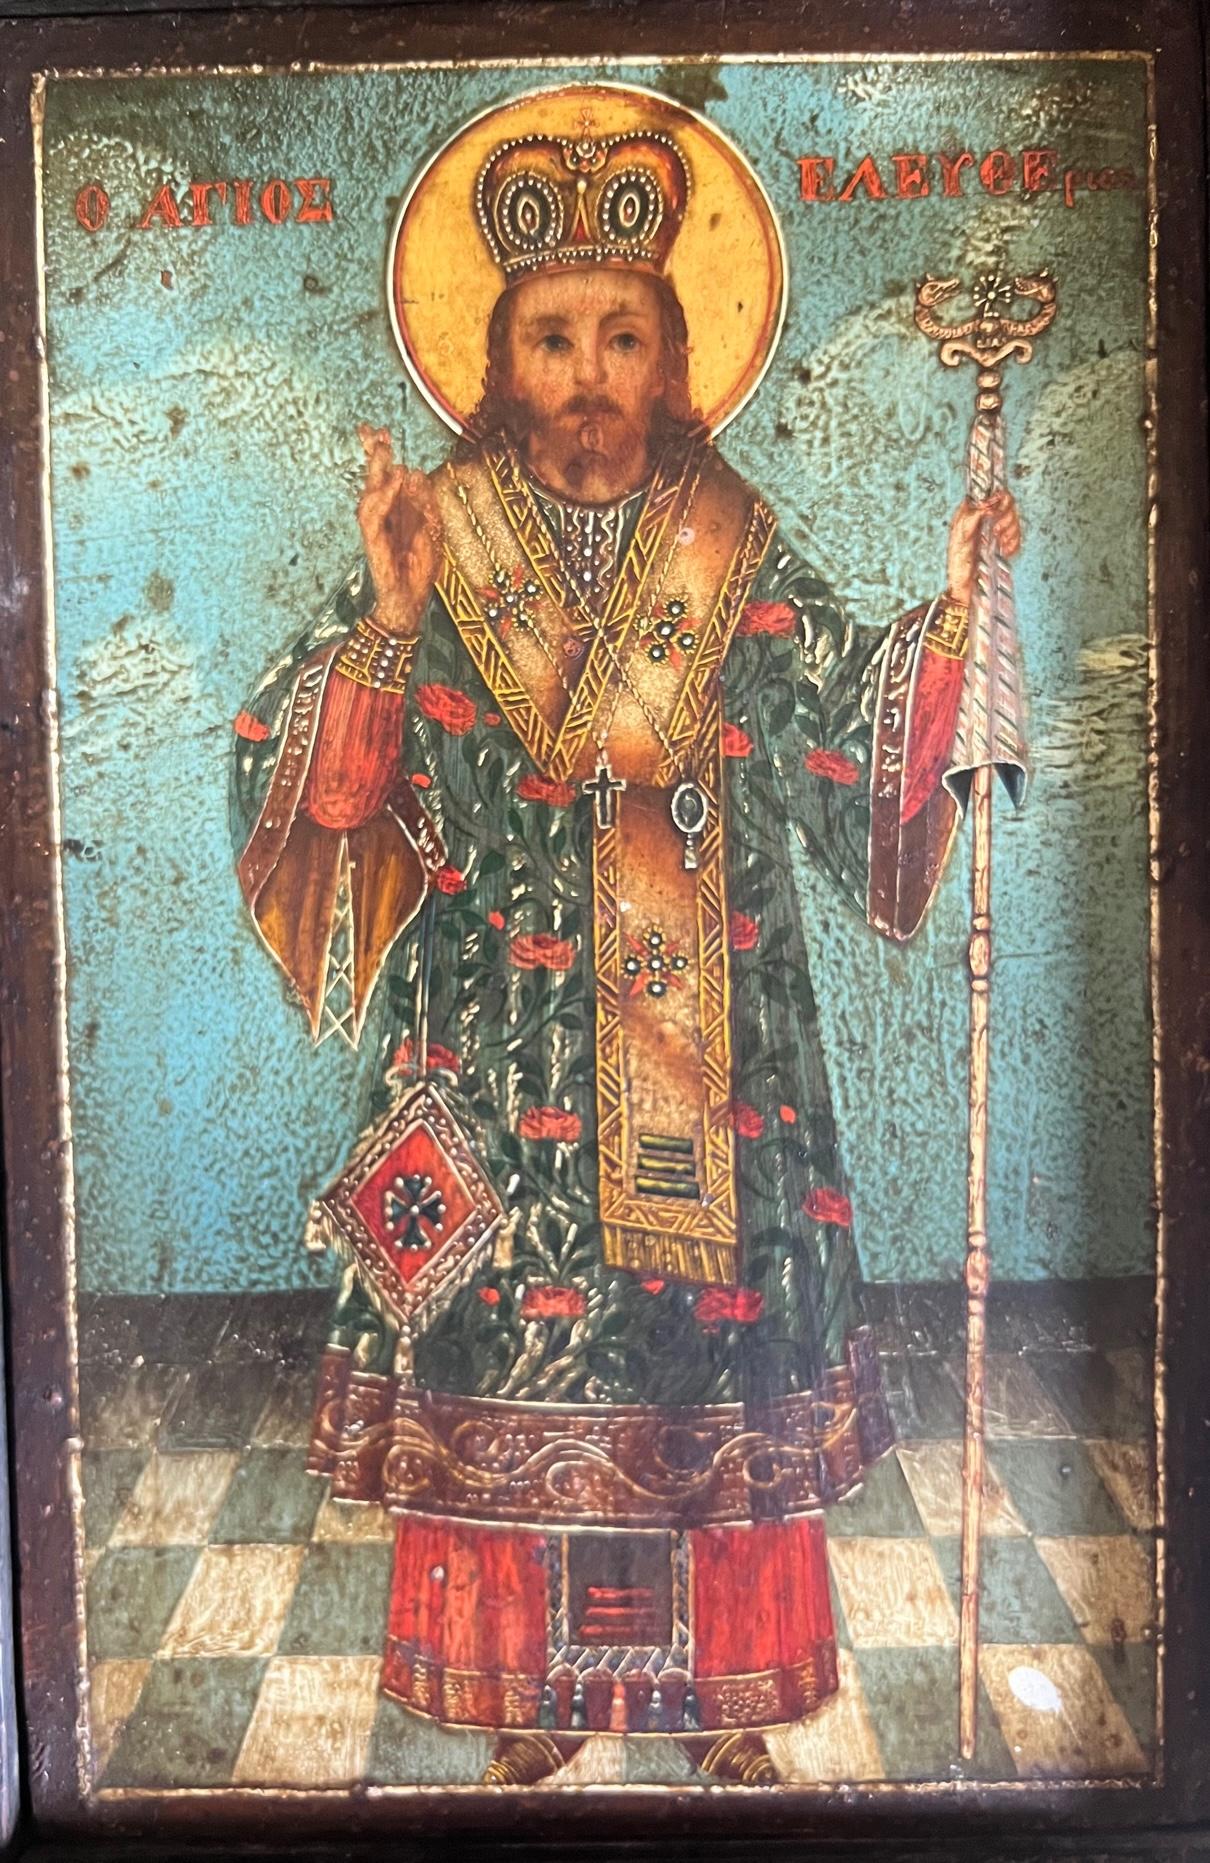 Very detailed vibrantly painted icon on wood with gilt accents and raised braille like details throughout. The 19th century or earlier painting is set in a hand made wooden frame.